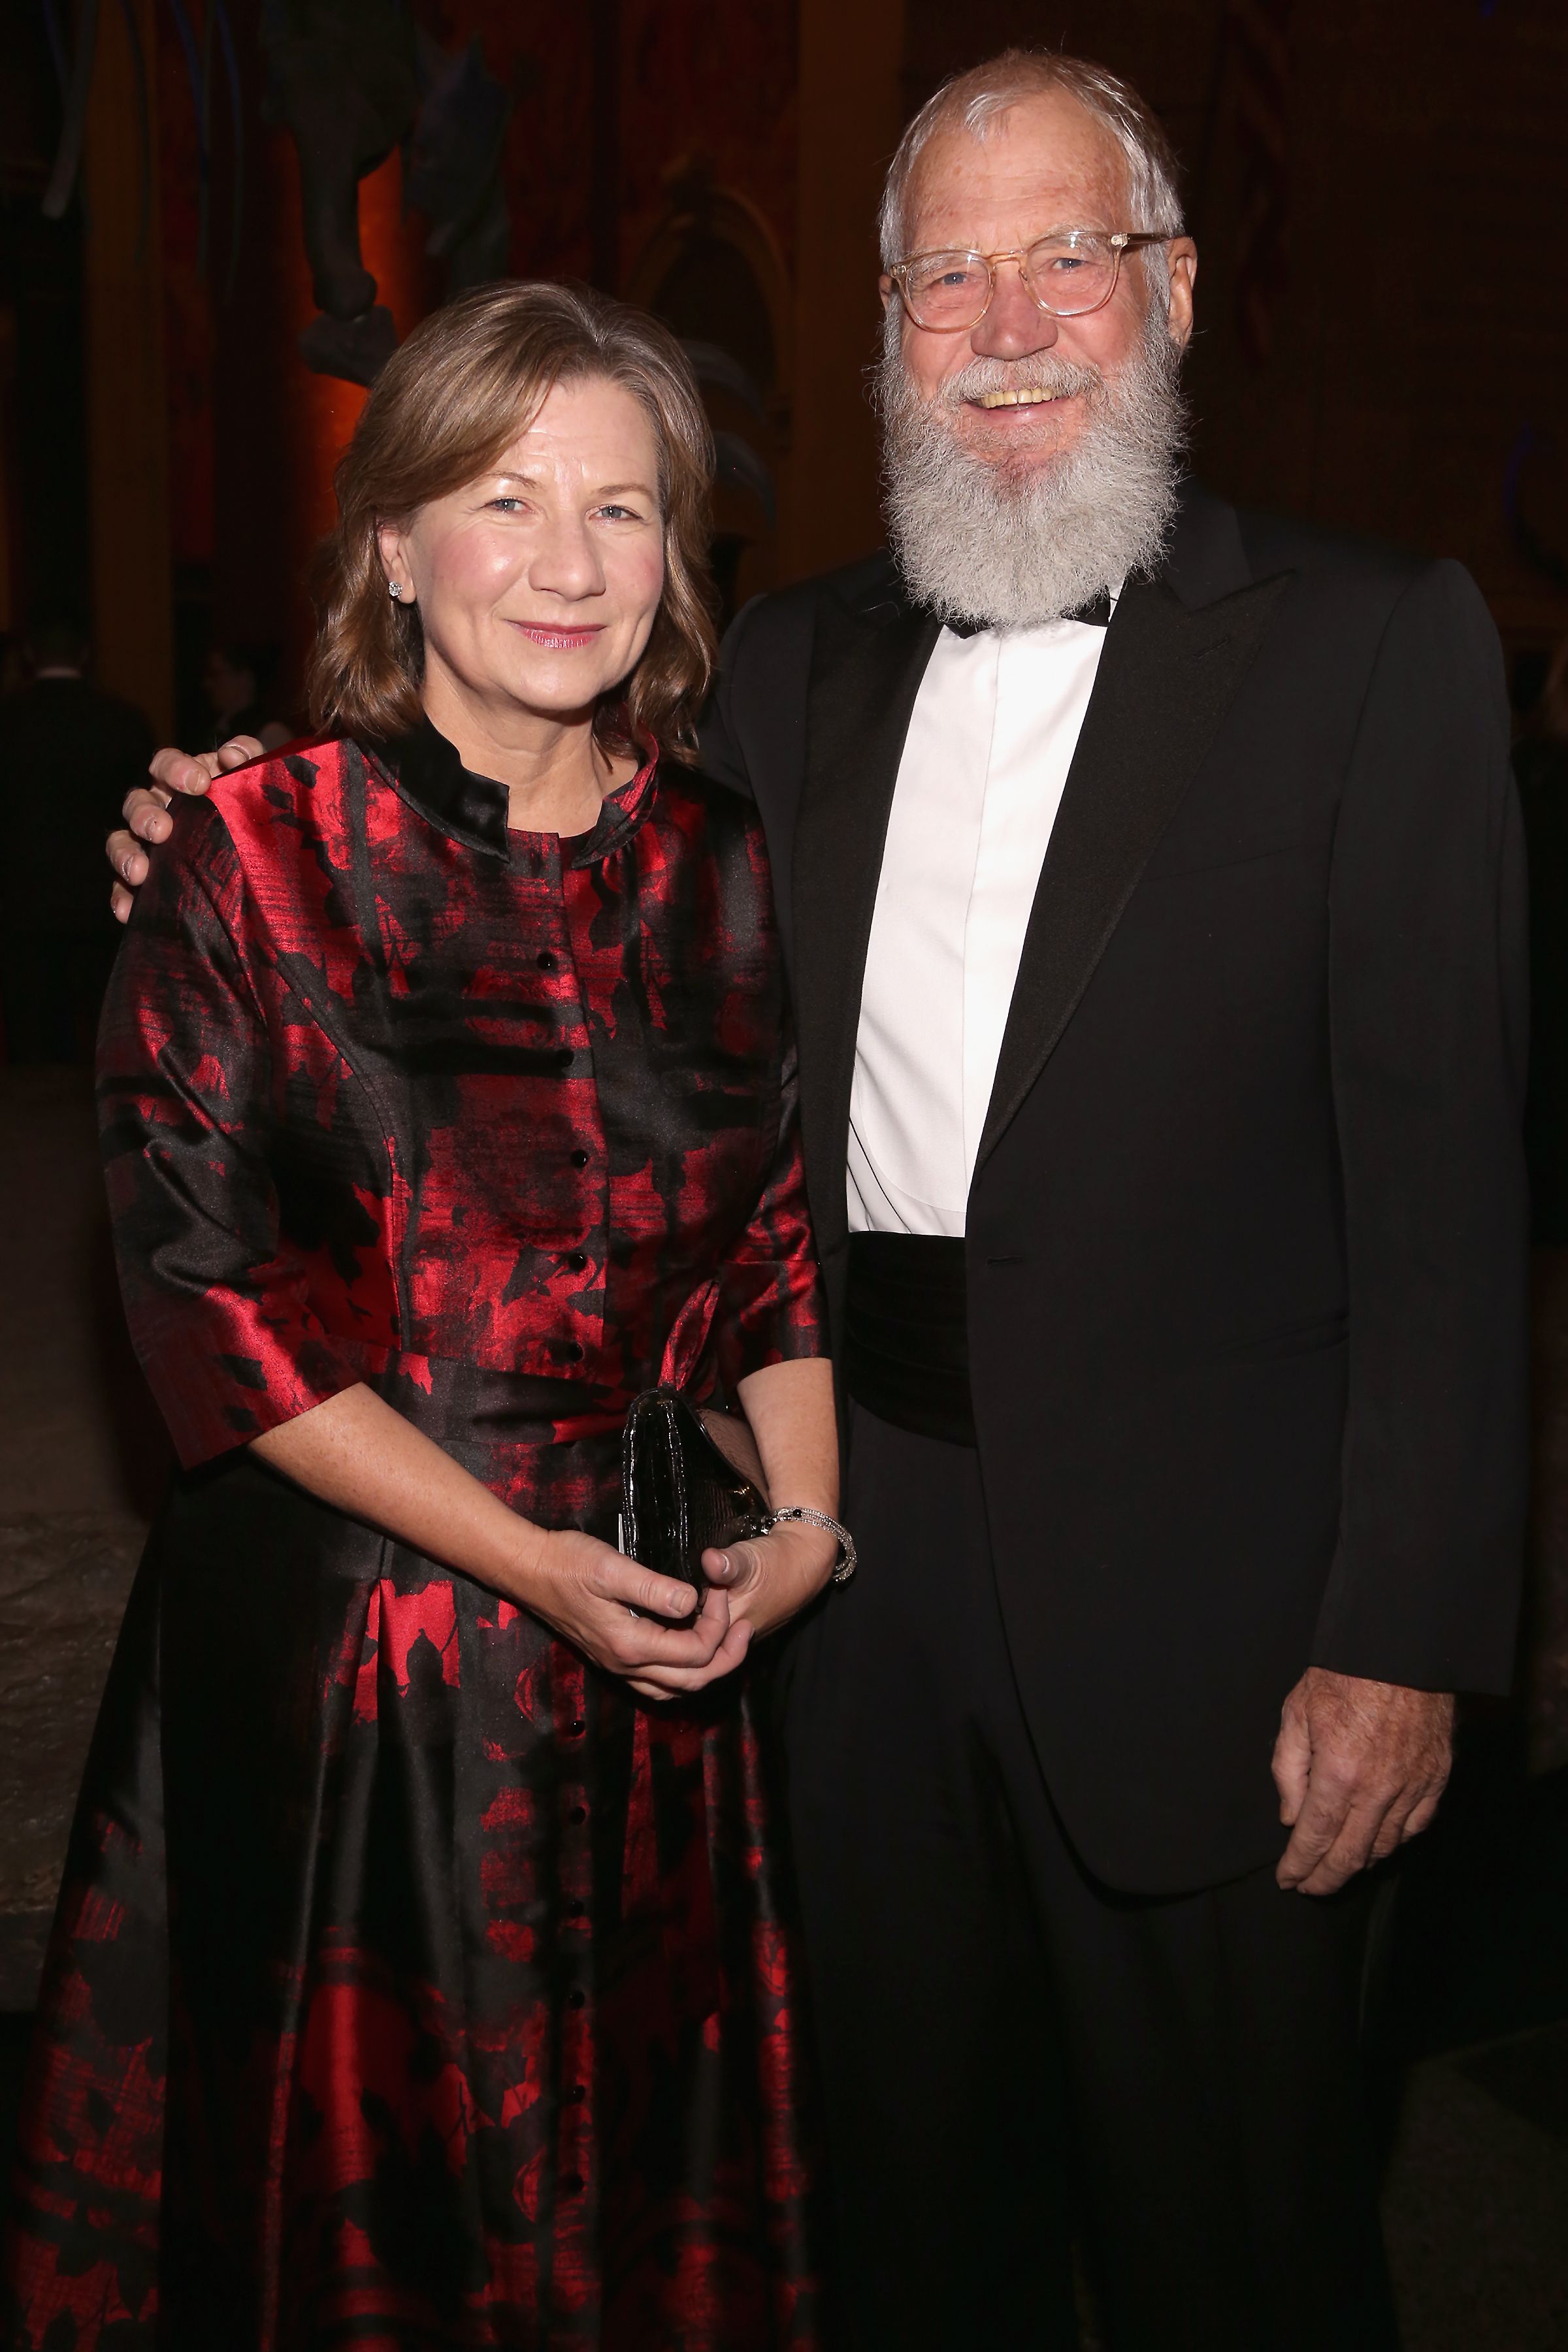 Regina Lasko and David Letterman at the Museum Gala at the American Museum of Natural History on November 30, 2017, in New York City | Photo: Sylvain Gaboury/Patrick McMullan/Getty Images